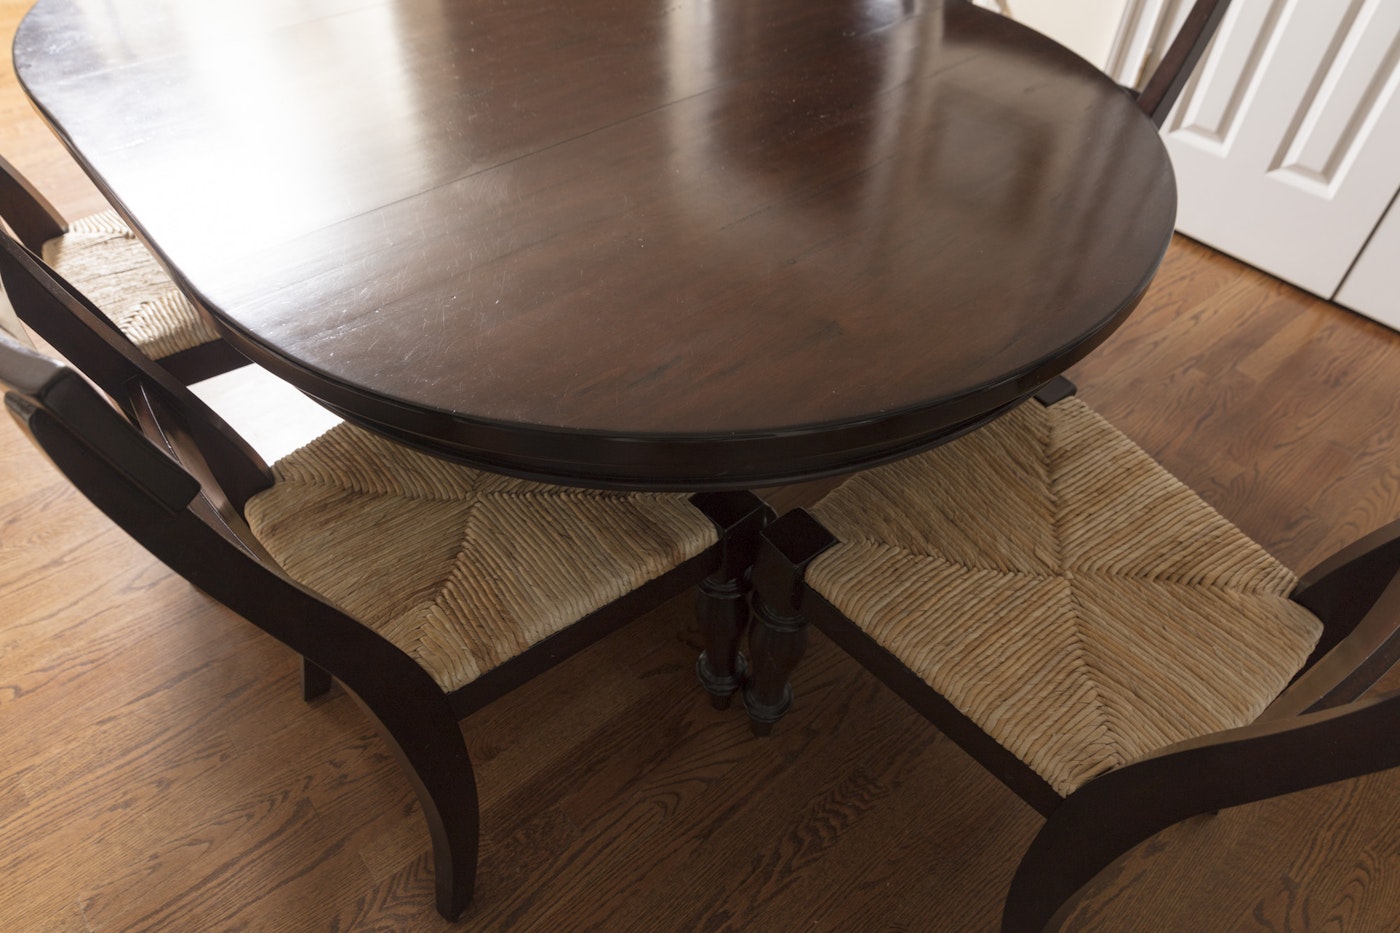 Pottery Barn Banks Dining Room Table